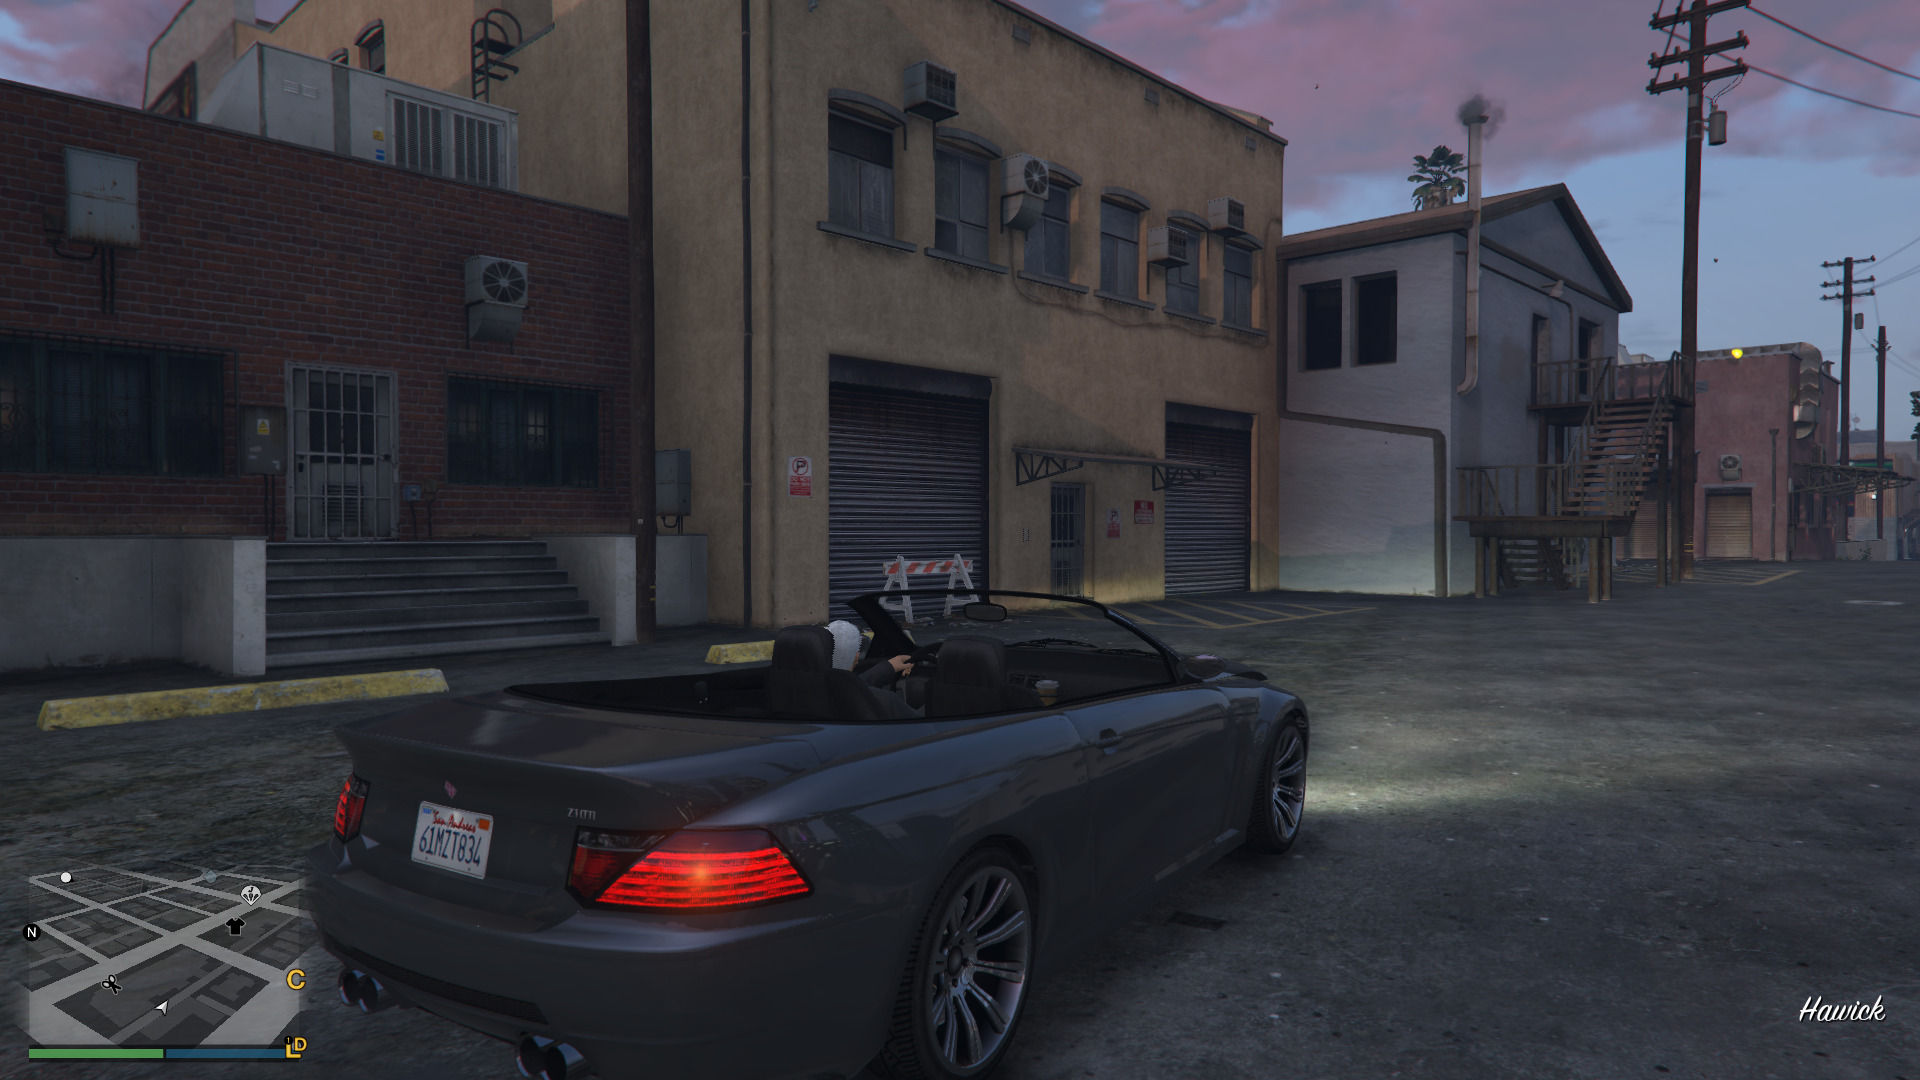 Hawick Clubhouse in GTA V